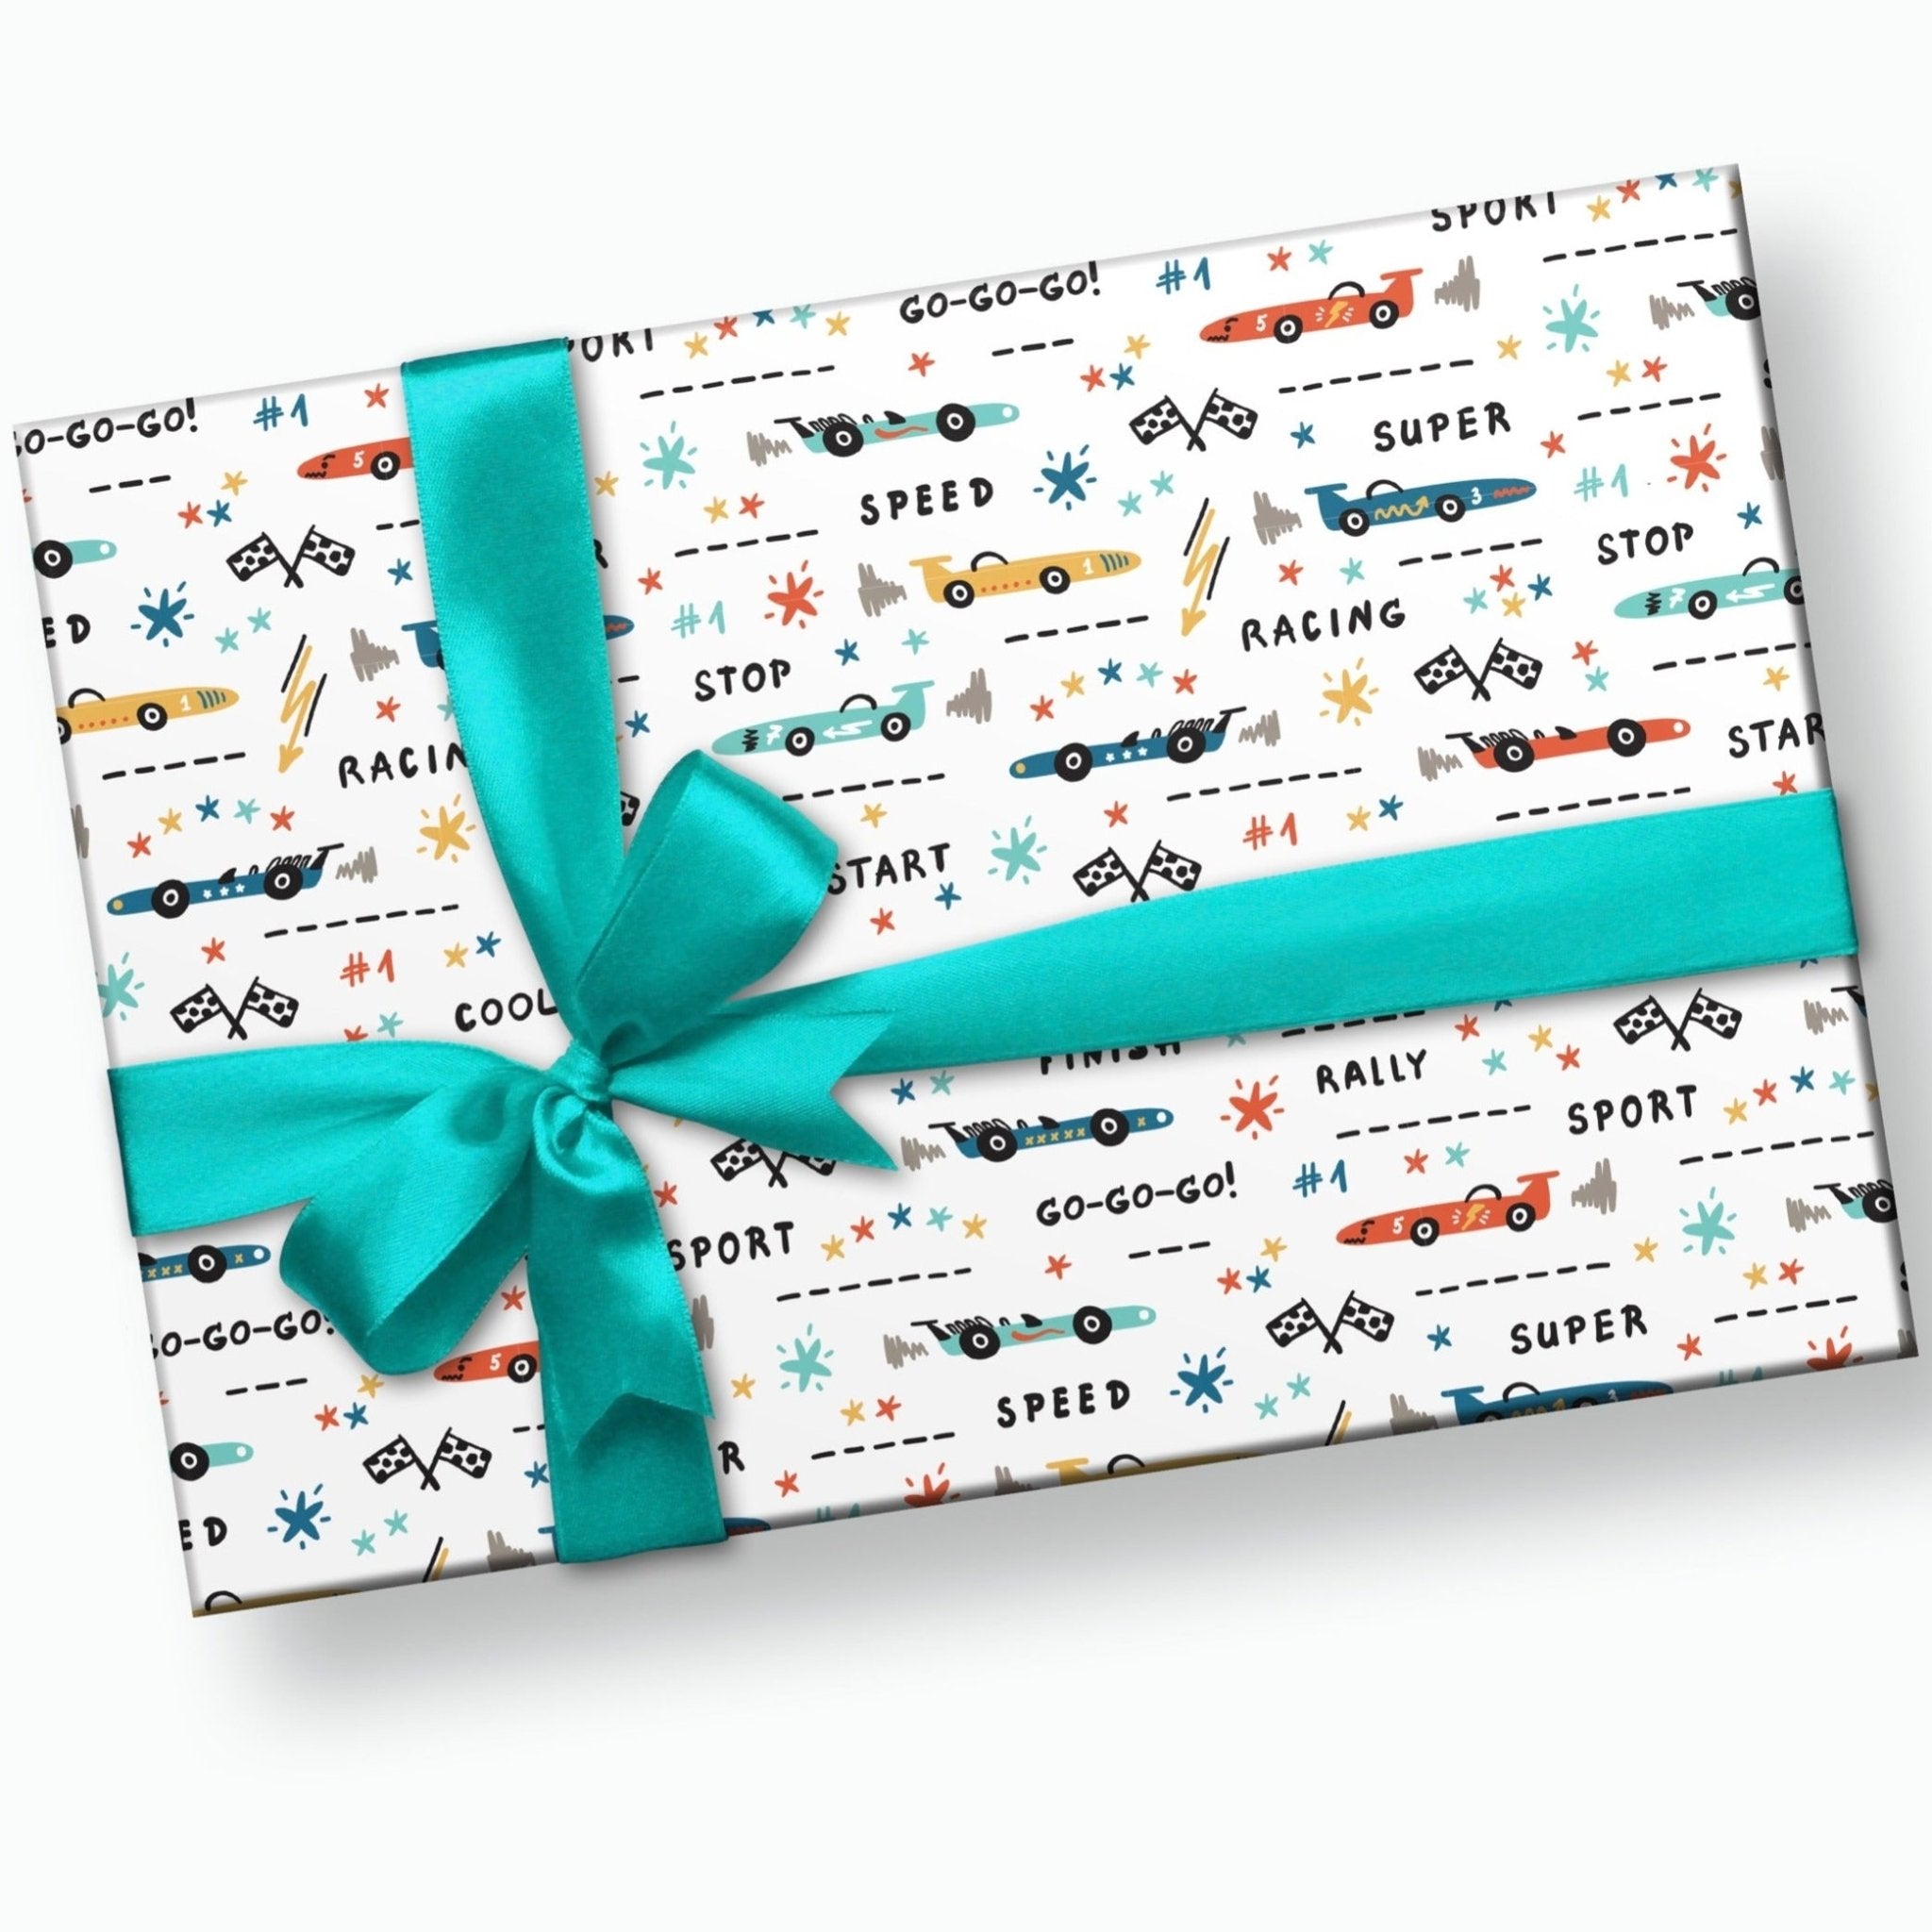 Two Fast Birthday Wrapping Paper Roll 2 Birthday Party Paper Race Car Gift  Wrapping Second Birthday Gift Wrap Paper 